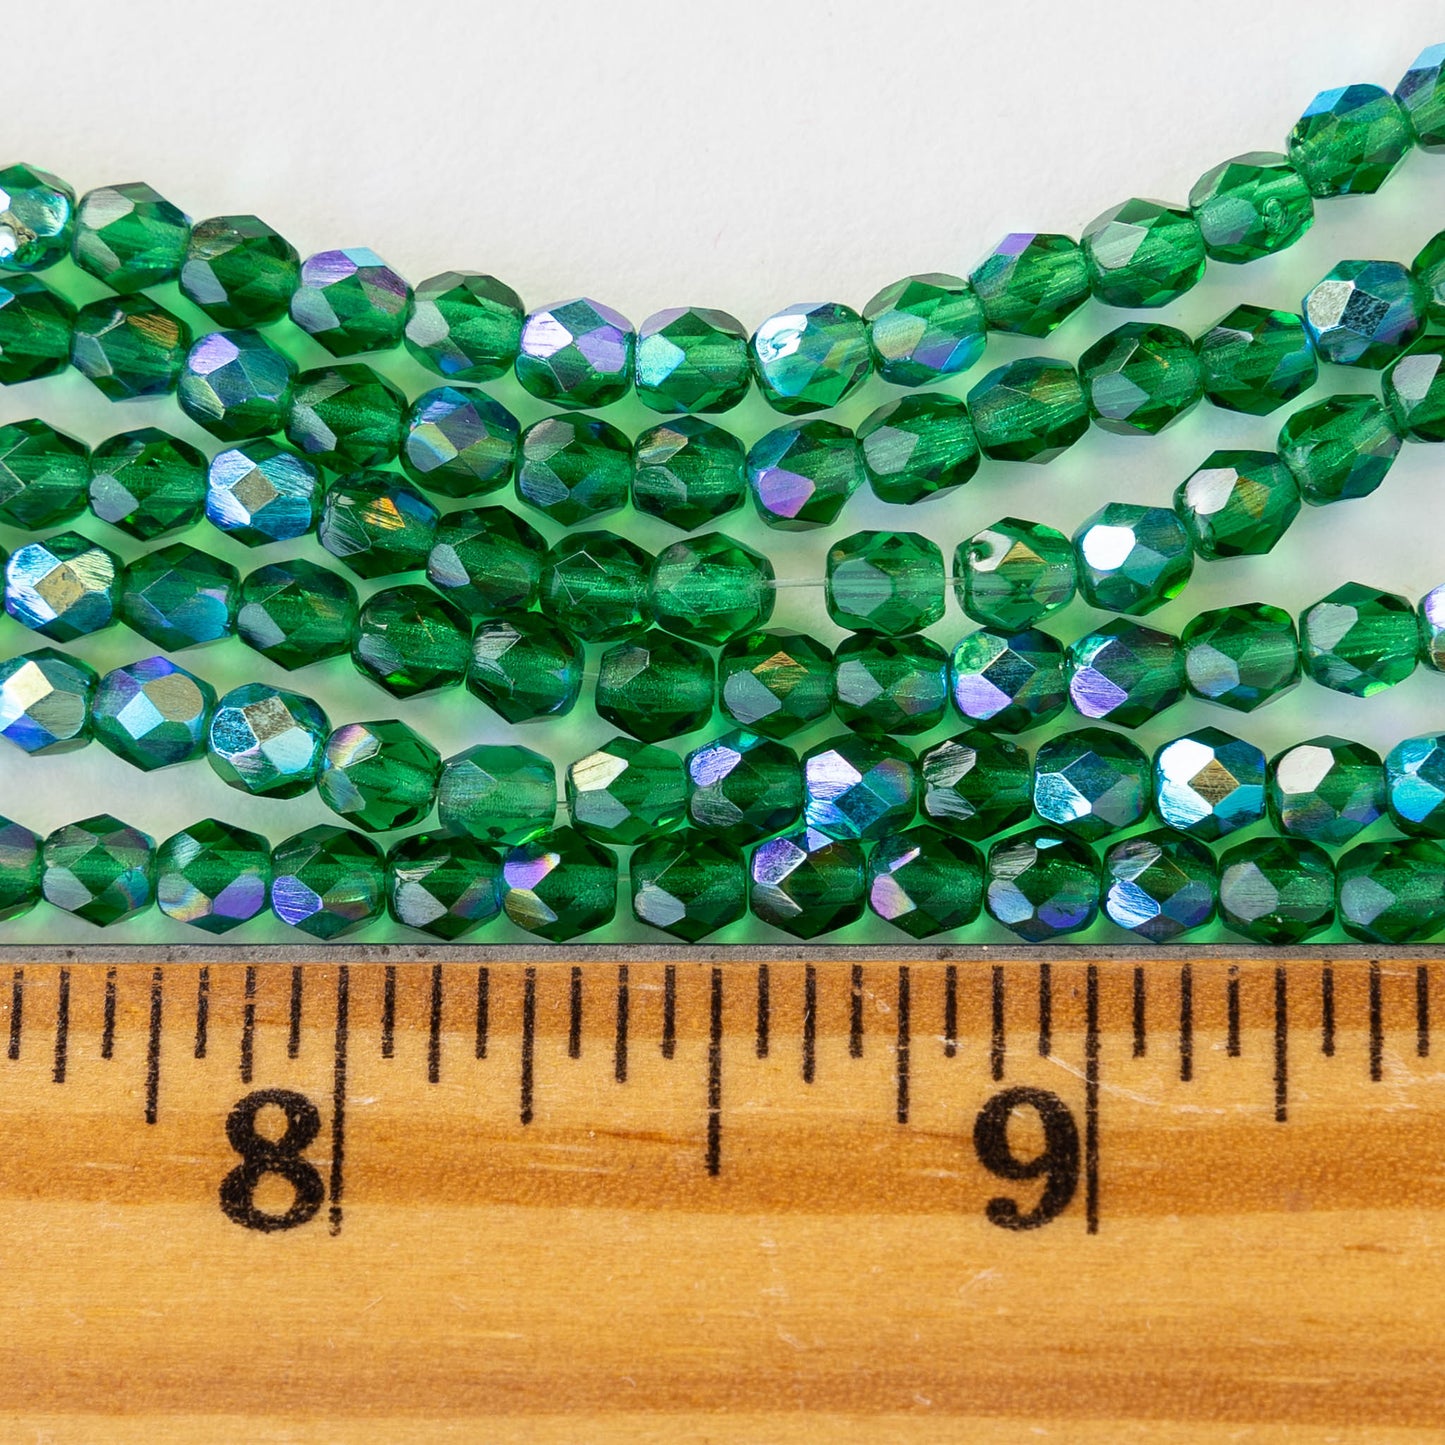 4mm Round Firepolished Beads - Emerald Green AB - 100 Beads